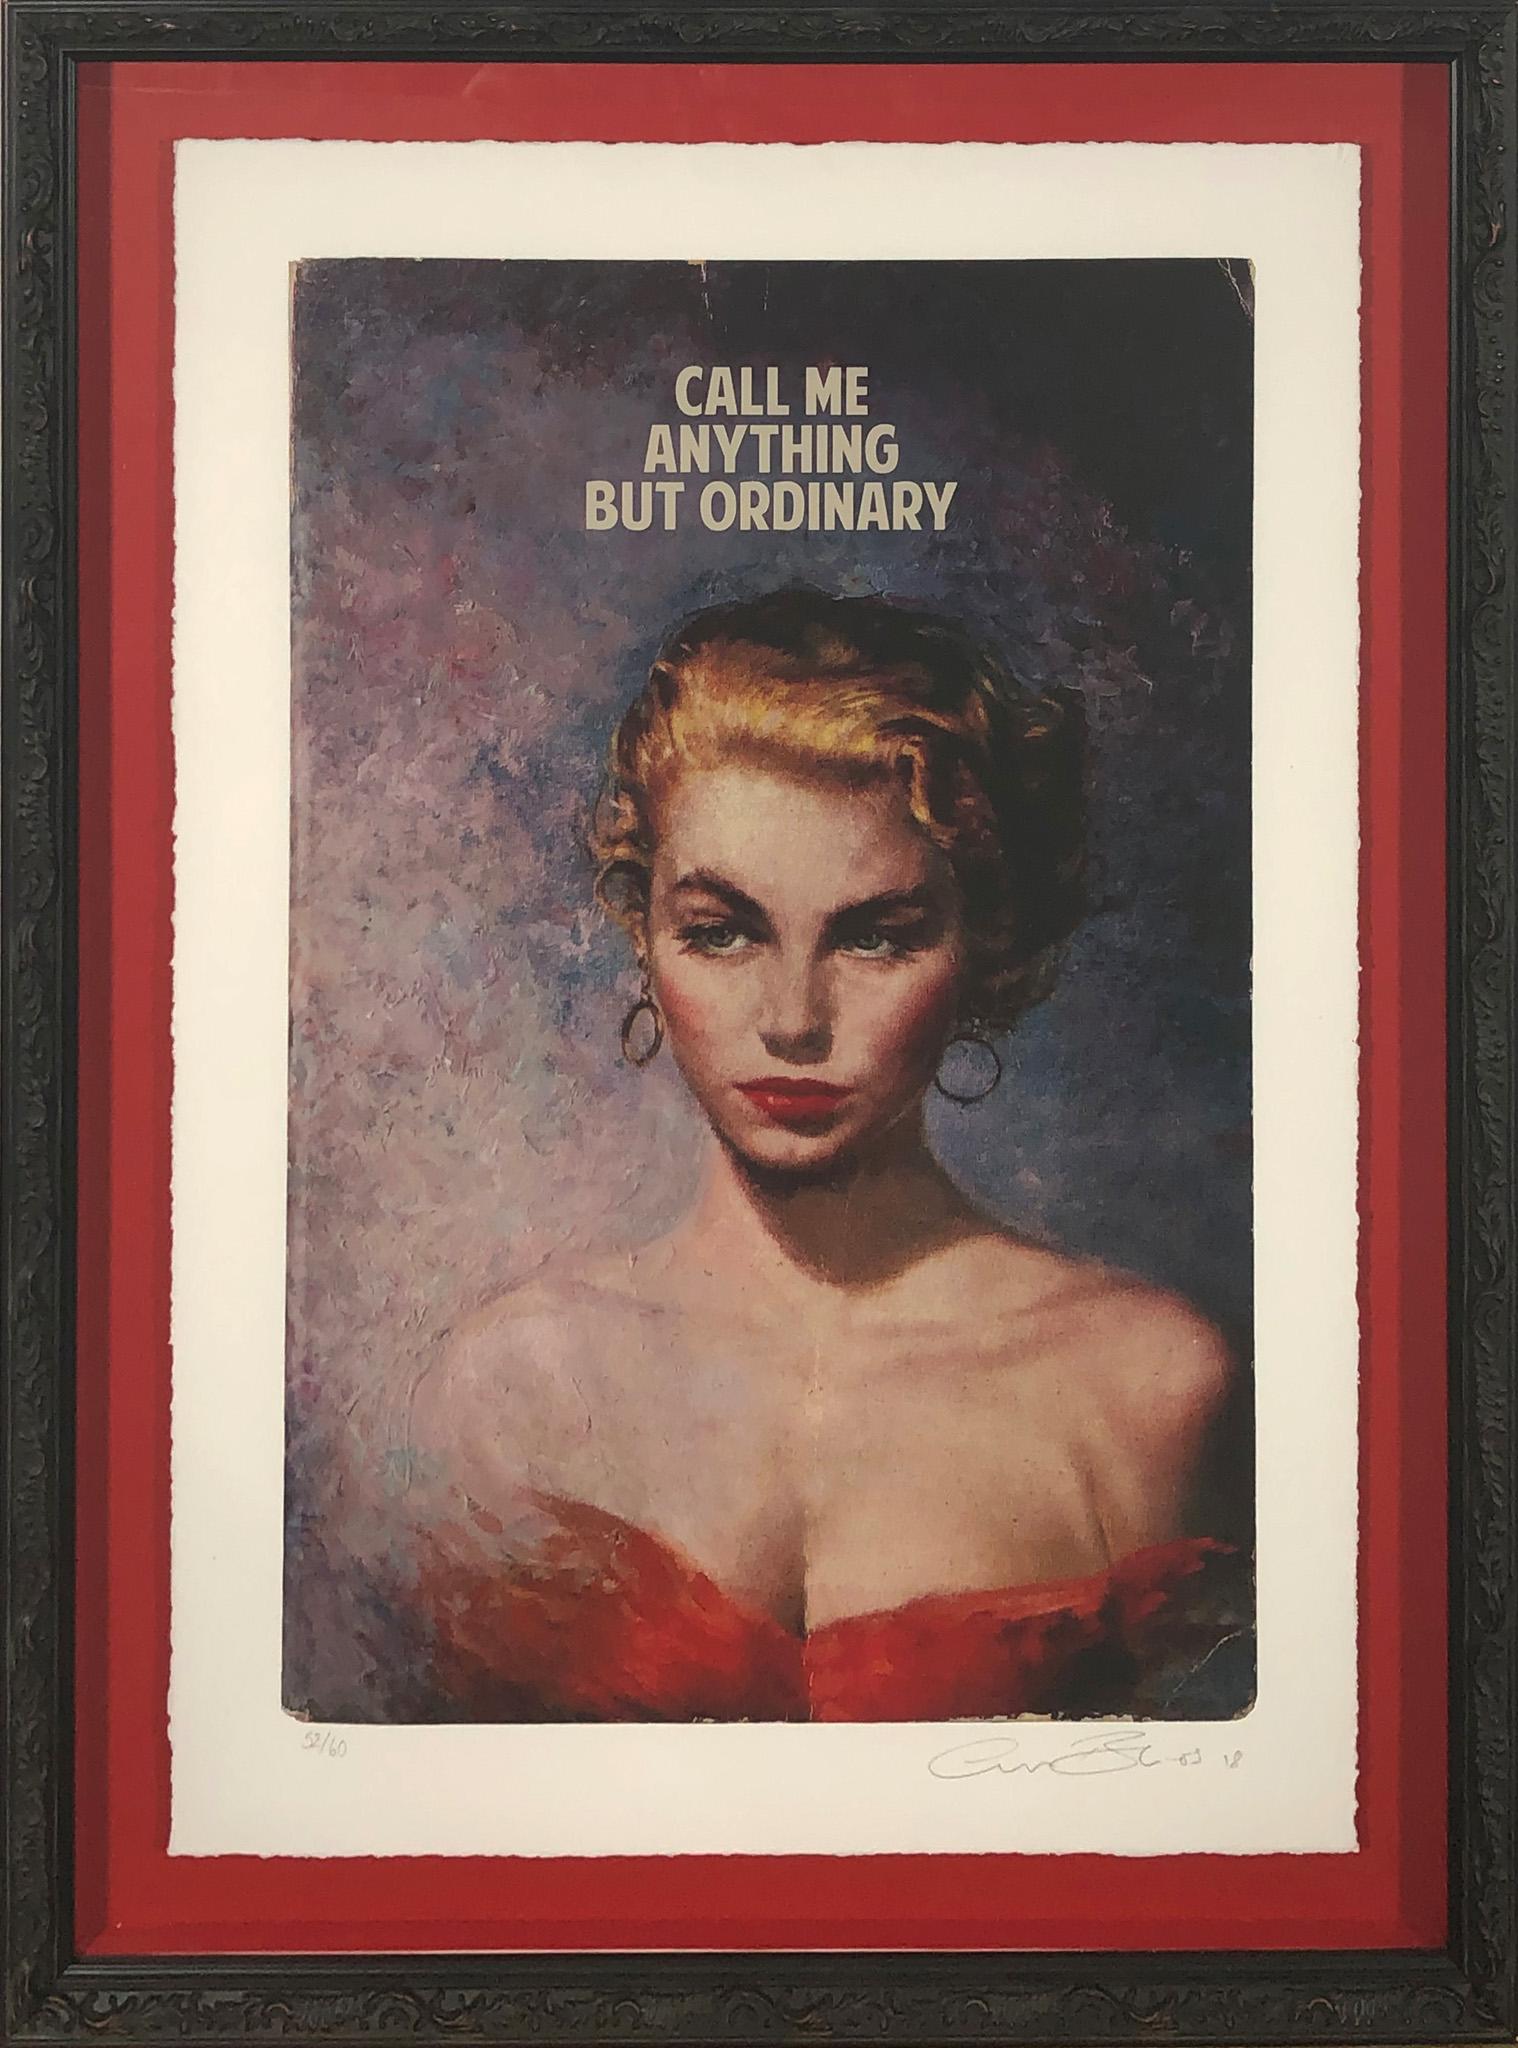 Call Me Anything But Ordinary - Print by The Connor Brothers 